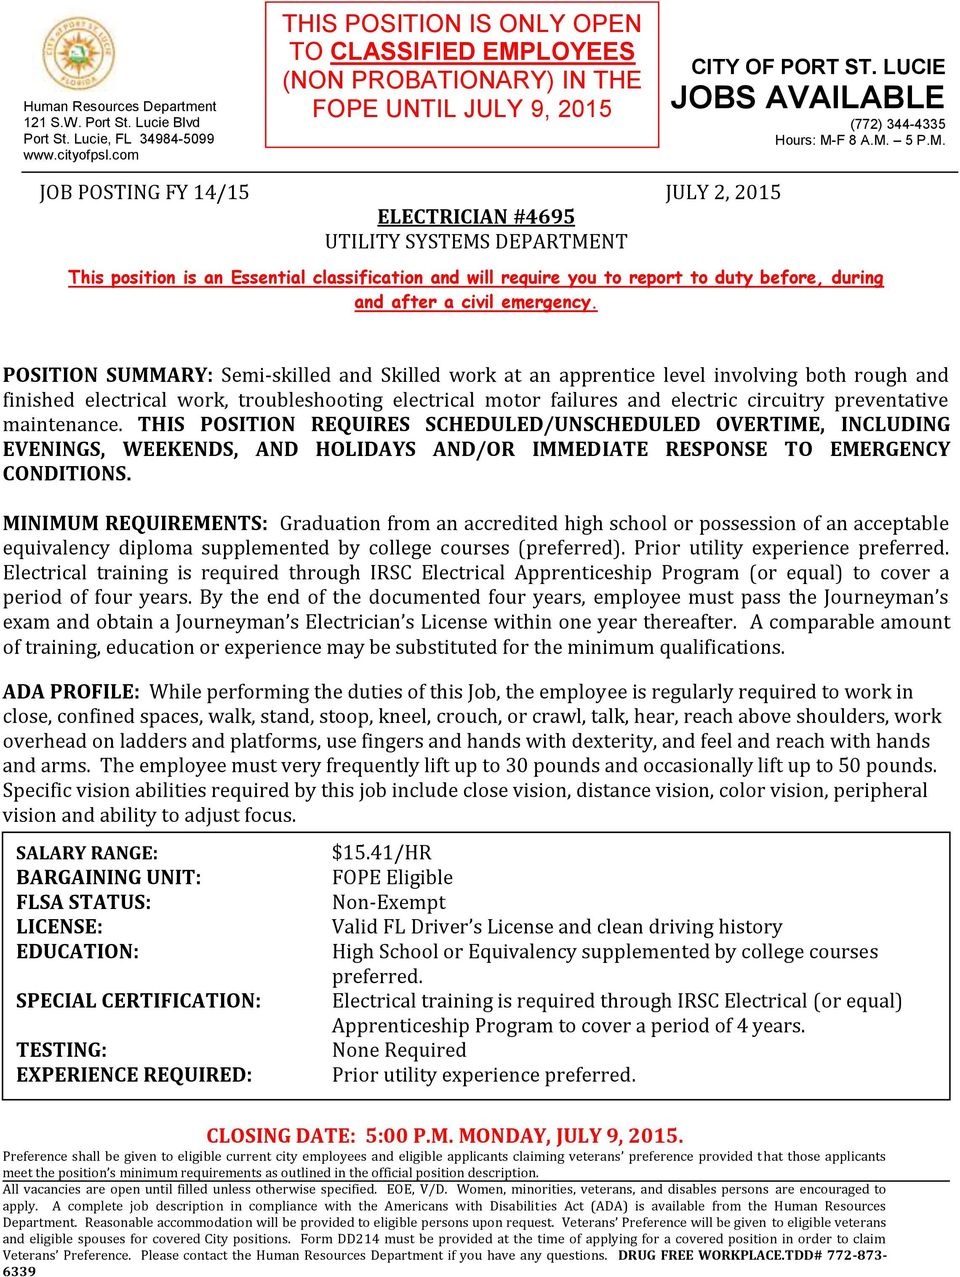 LOYEES (NON PROBATIONARY) IN THE FOPE UNTIL JULY 9, 2015 CITY OF PORT ST. LUCIE JOBS AVAILABLE (772) 344-4335 Hours: M-